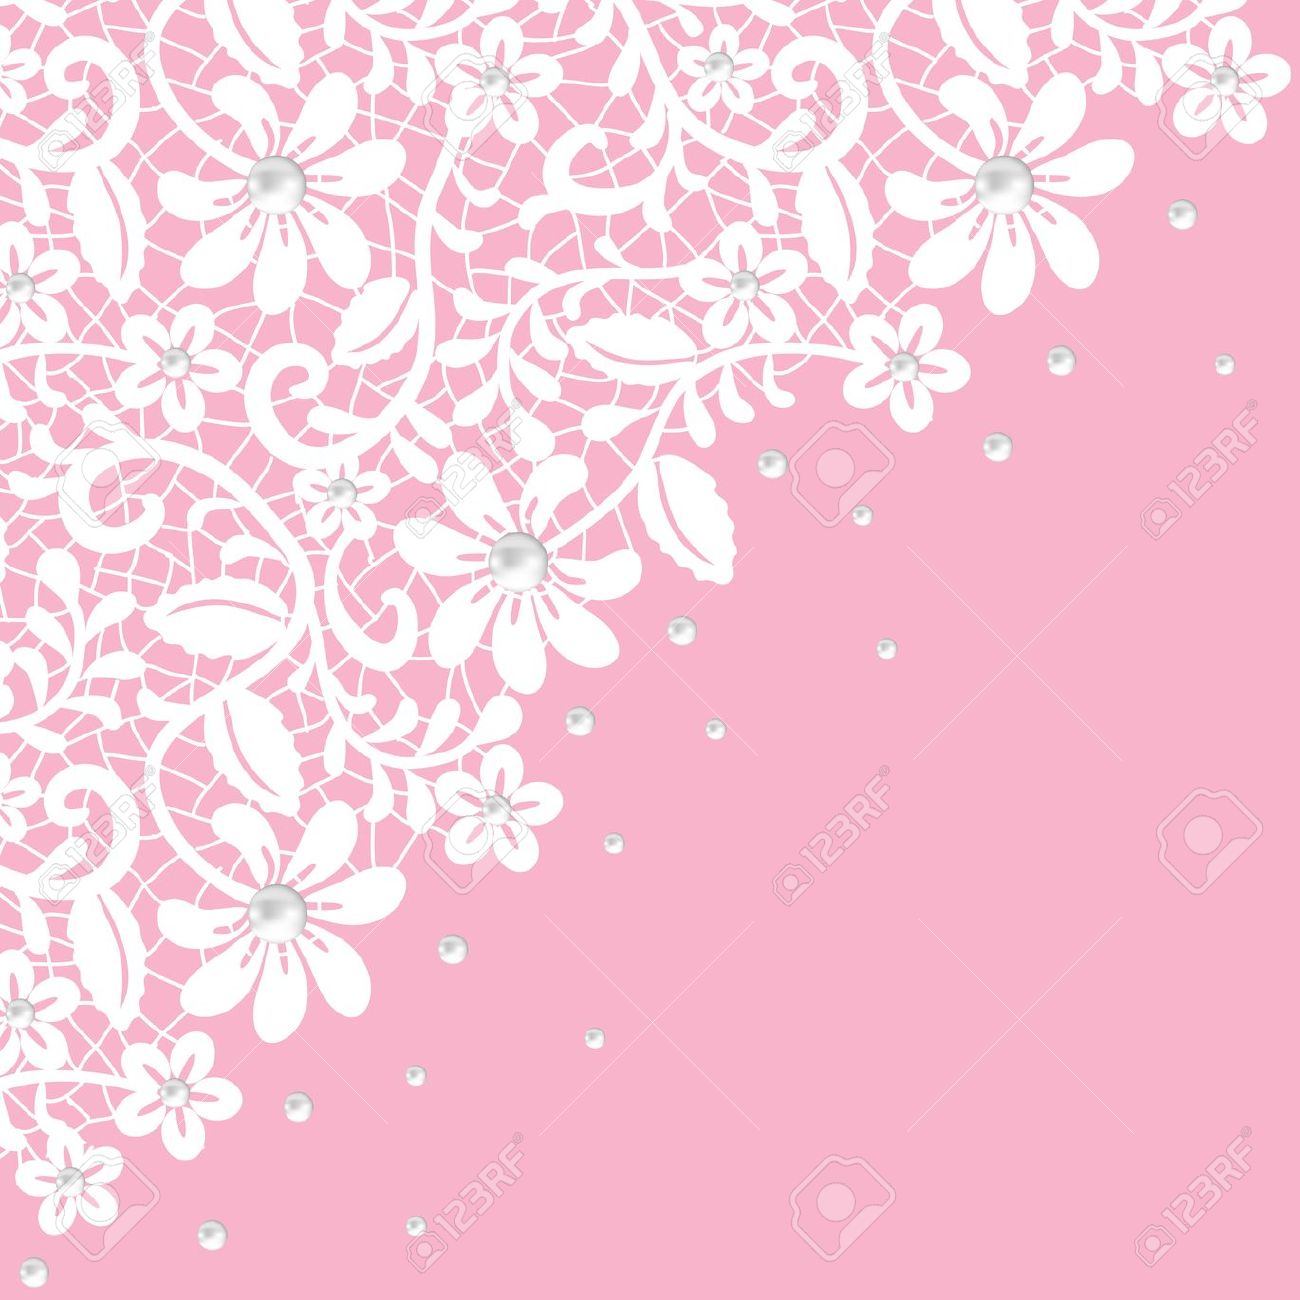 Pearls and lace clipart free